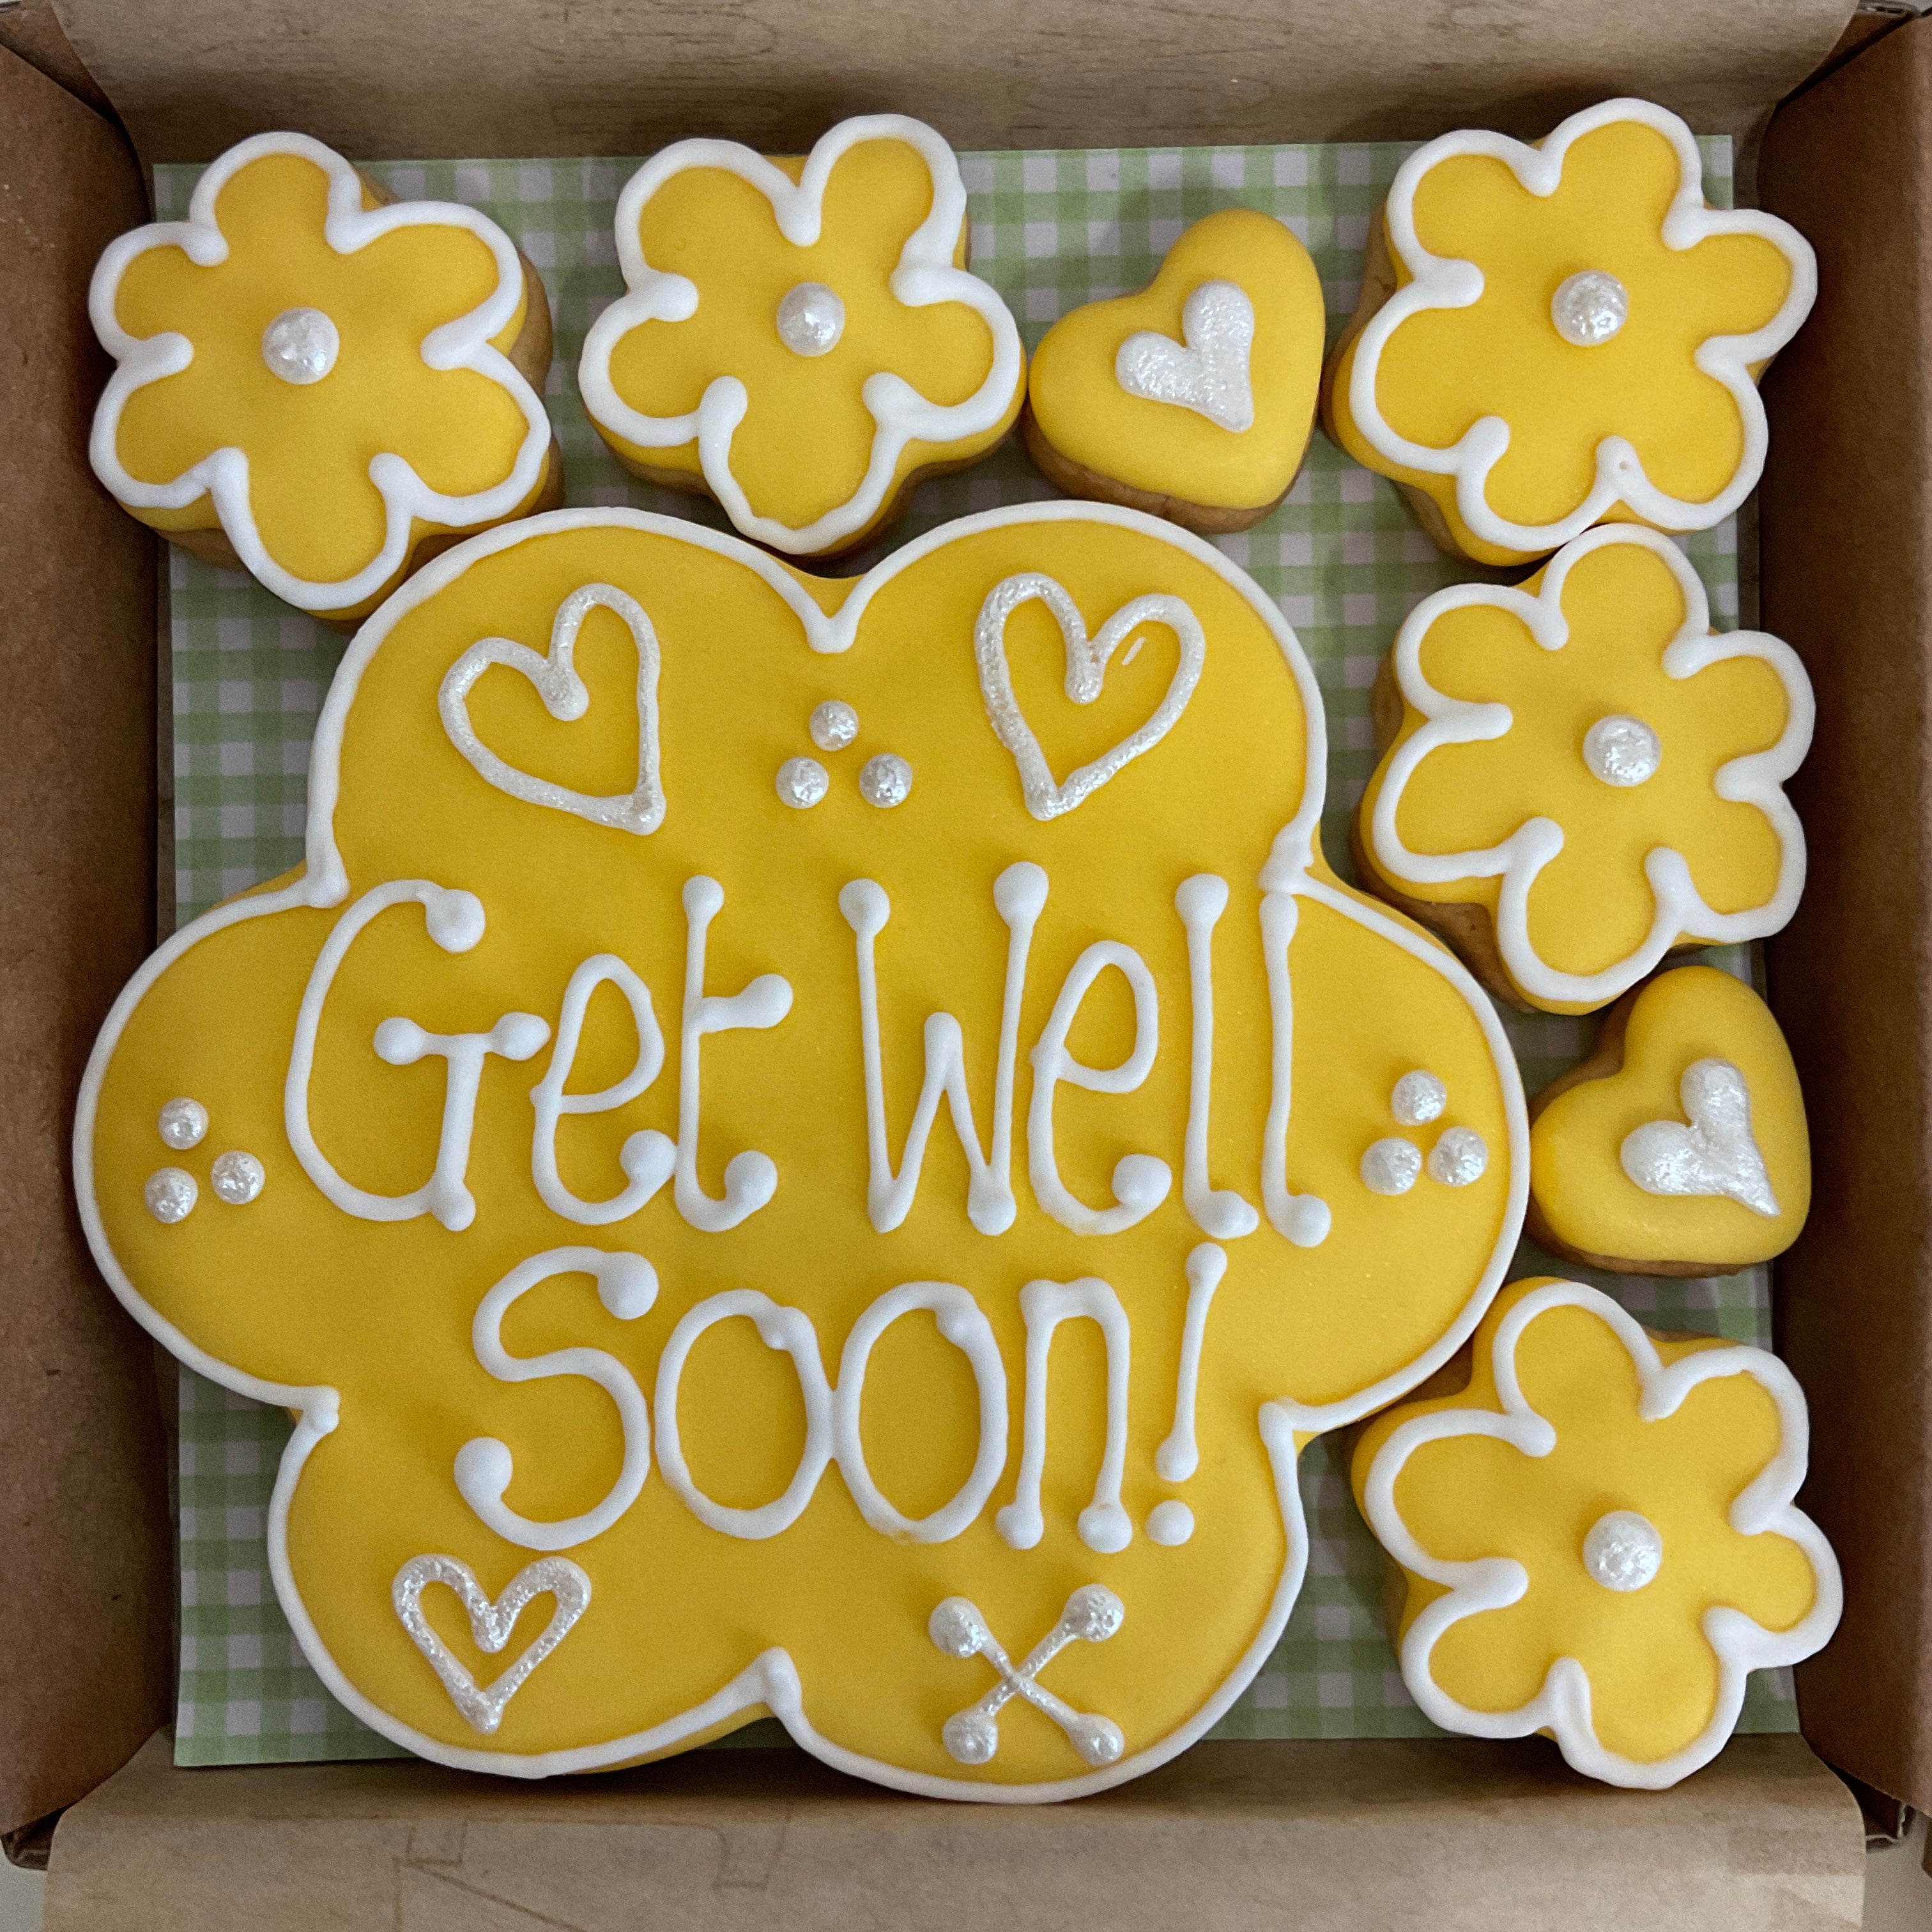 Get Well Soon Cookie Box